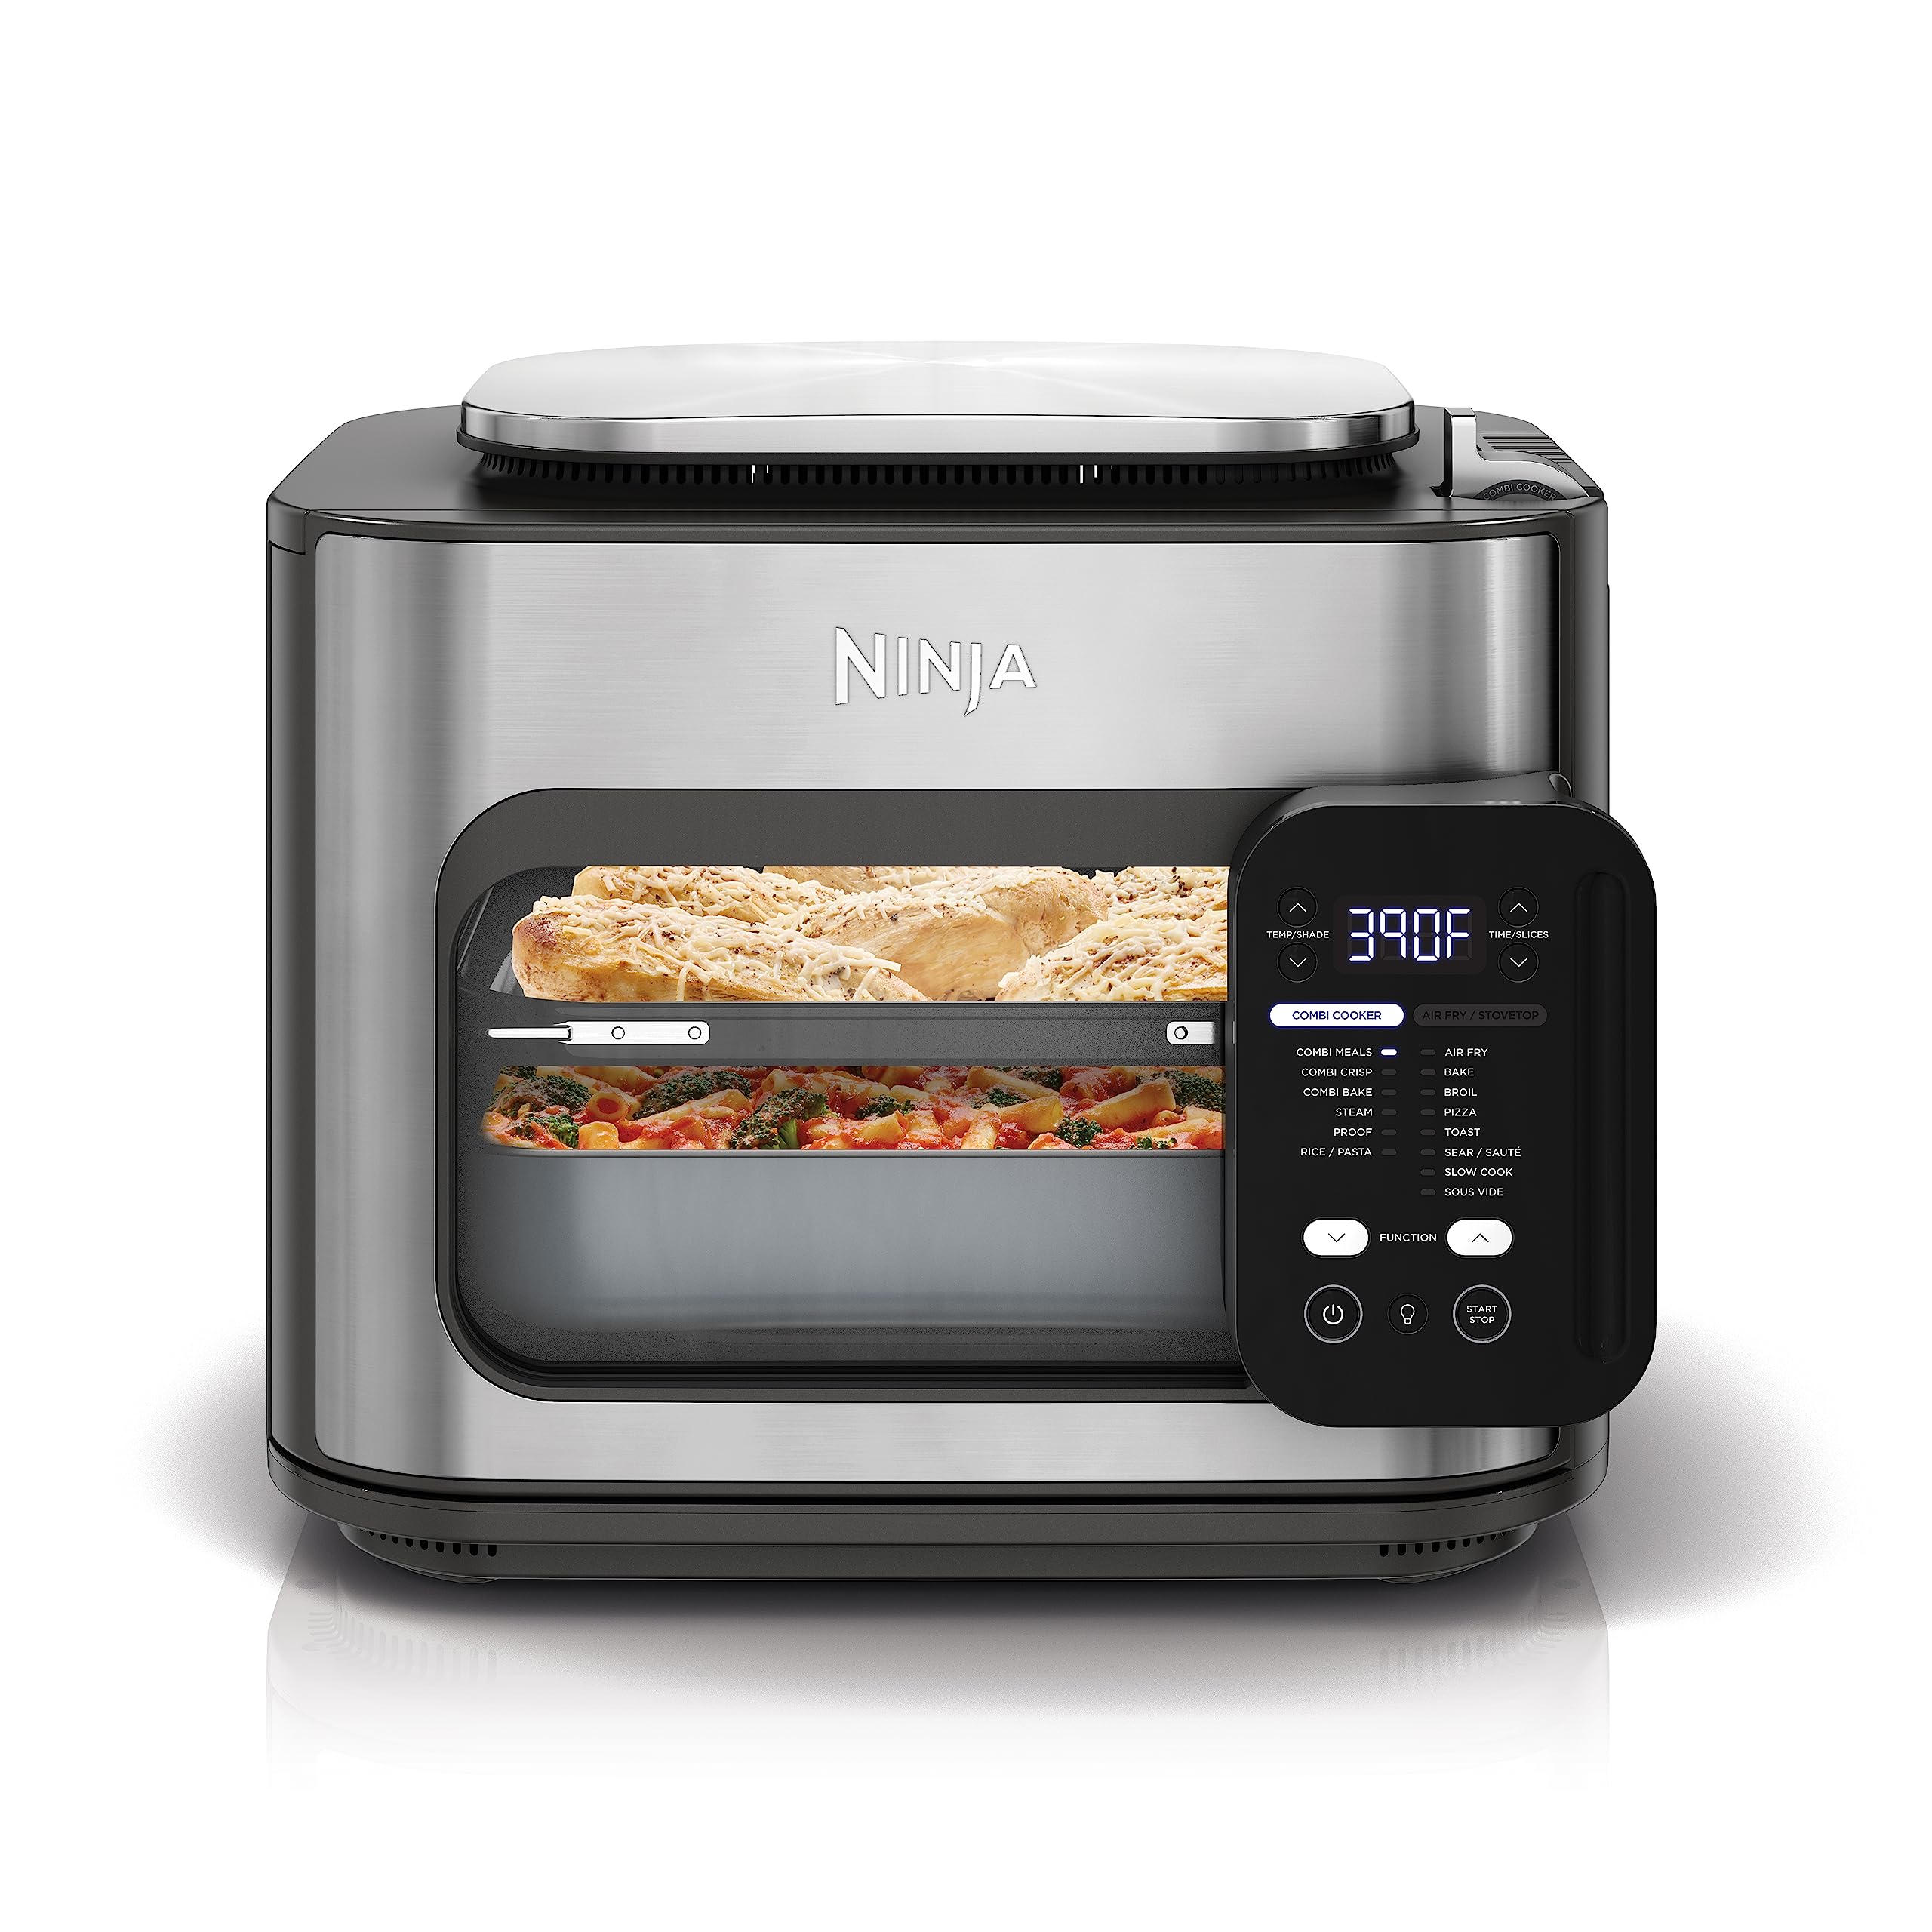 Ninja SFP701 Combi All-in-One Multicooker, Oven, and Air Fryer, 14-in-1 Functions,15-Minute Complete Meals, Includes 3 Accessories, ...